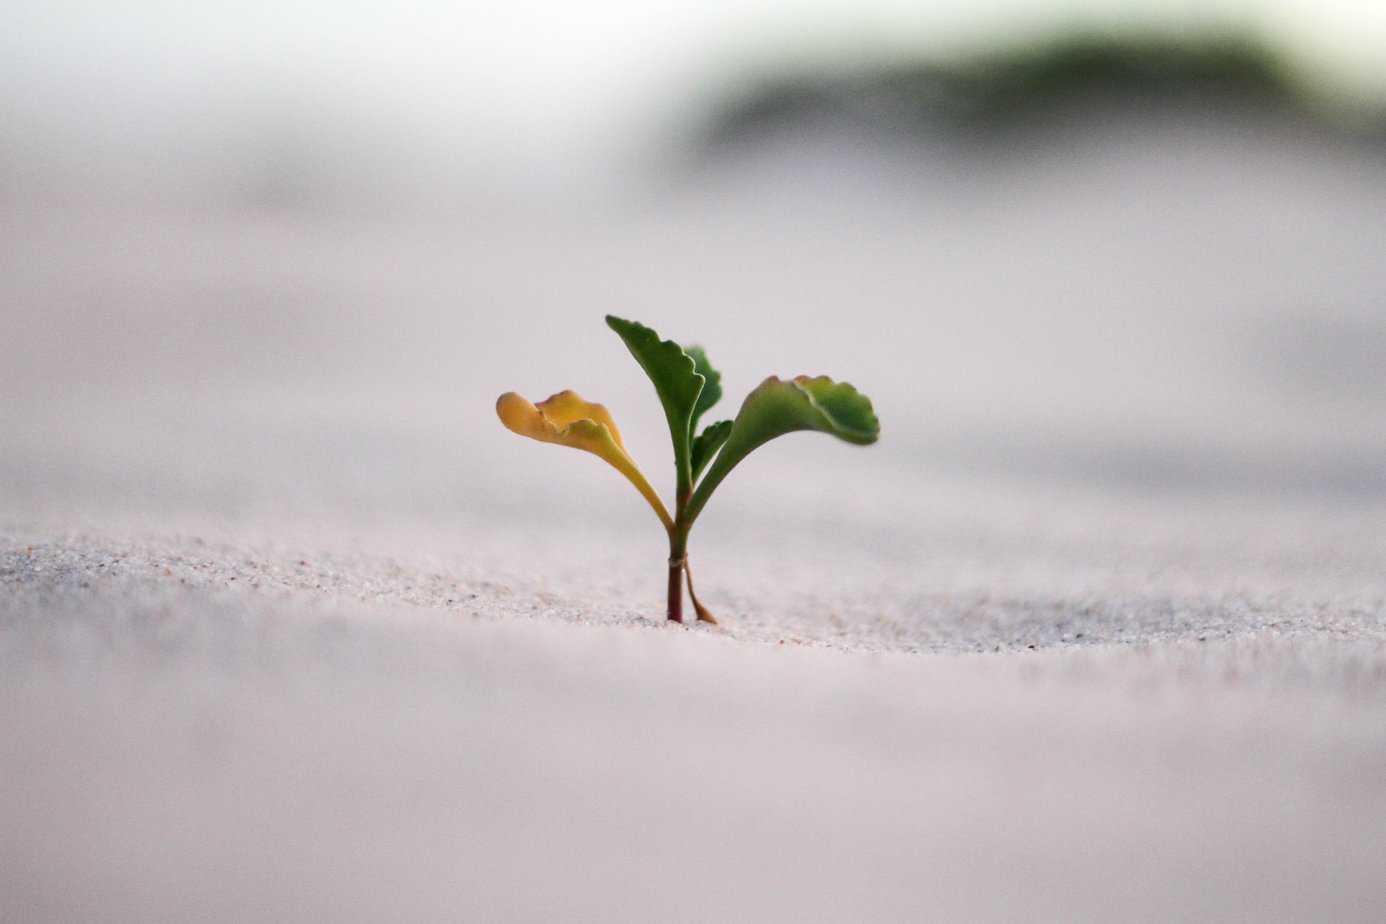 small plant sprout growing in sand